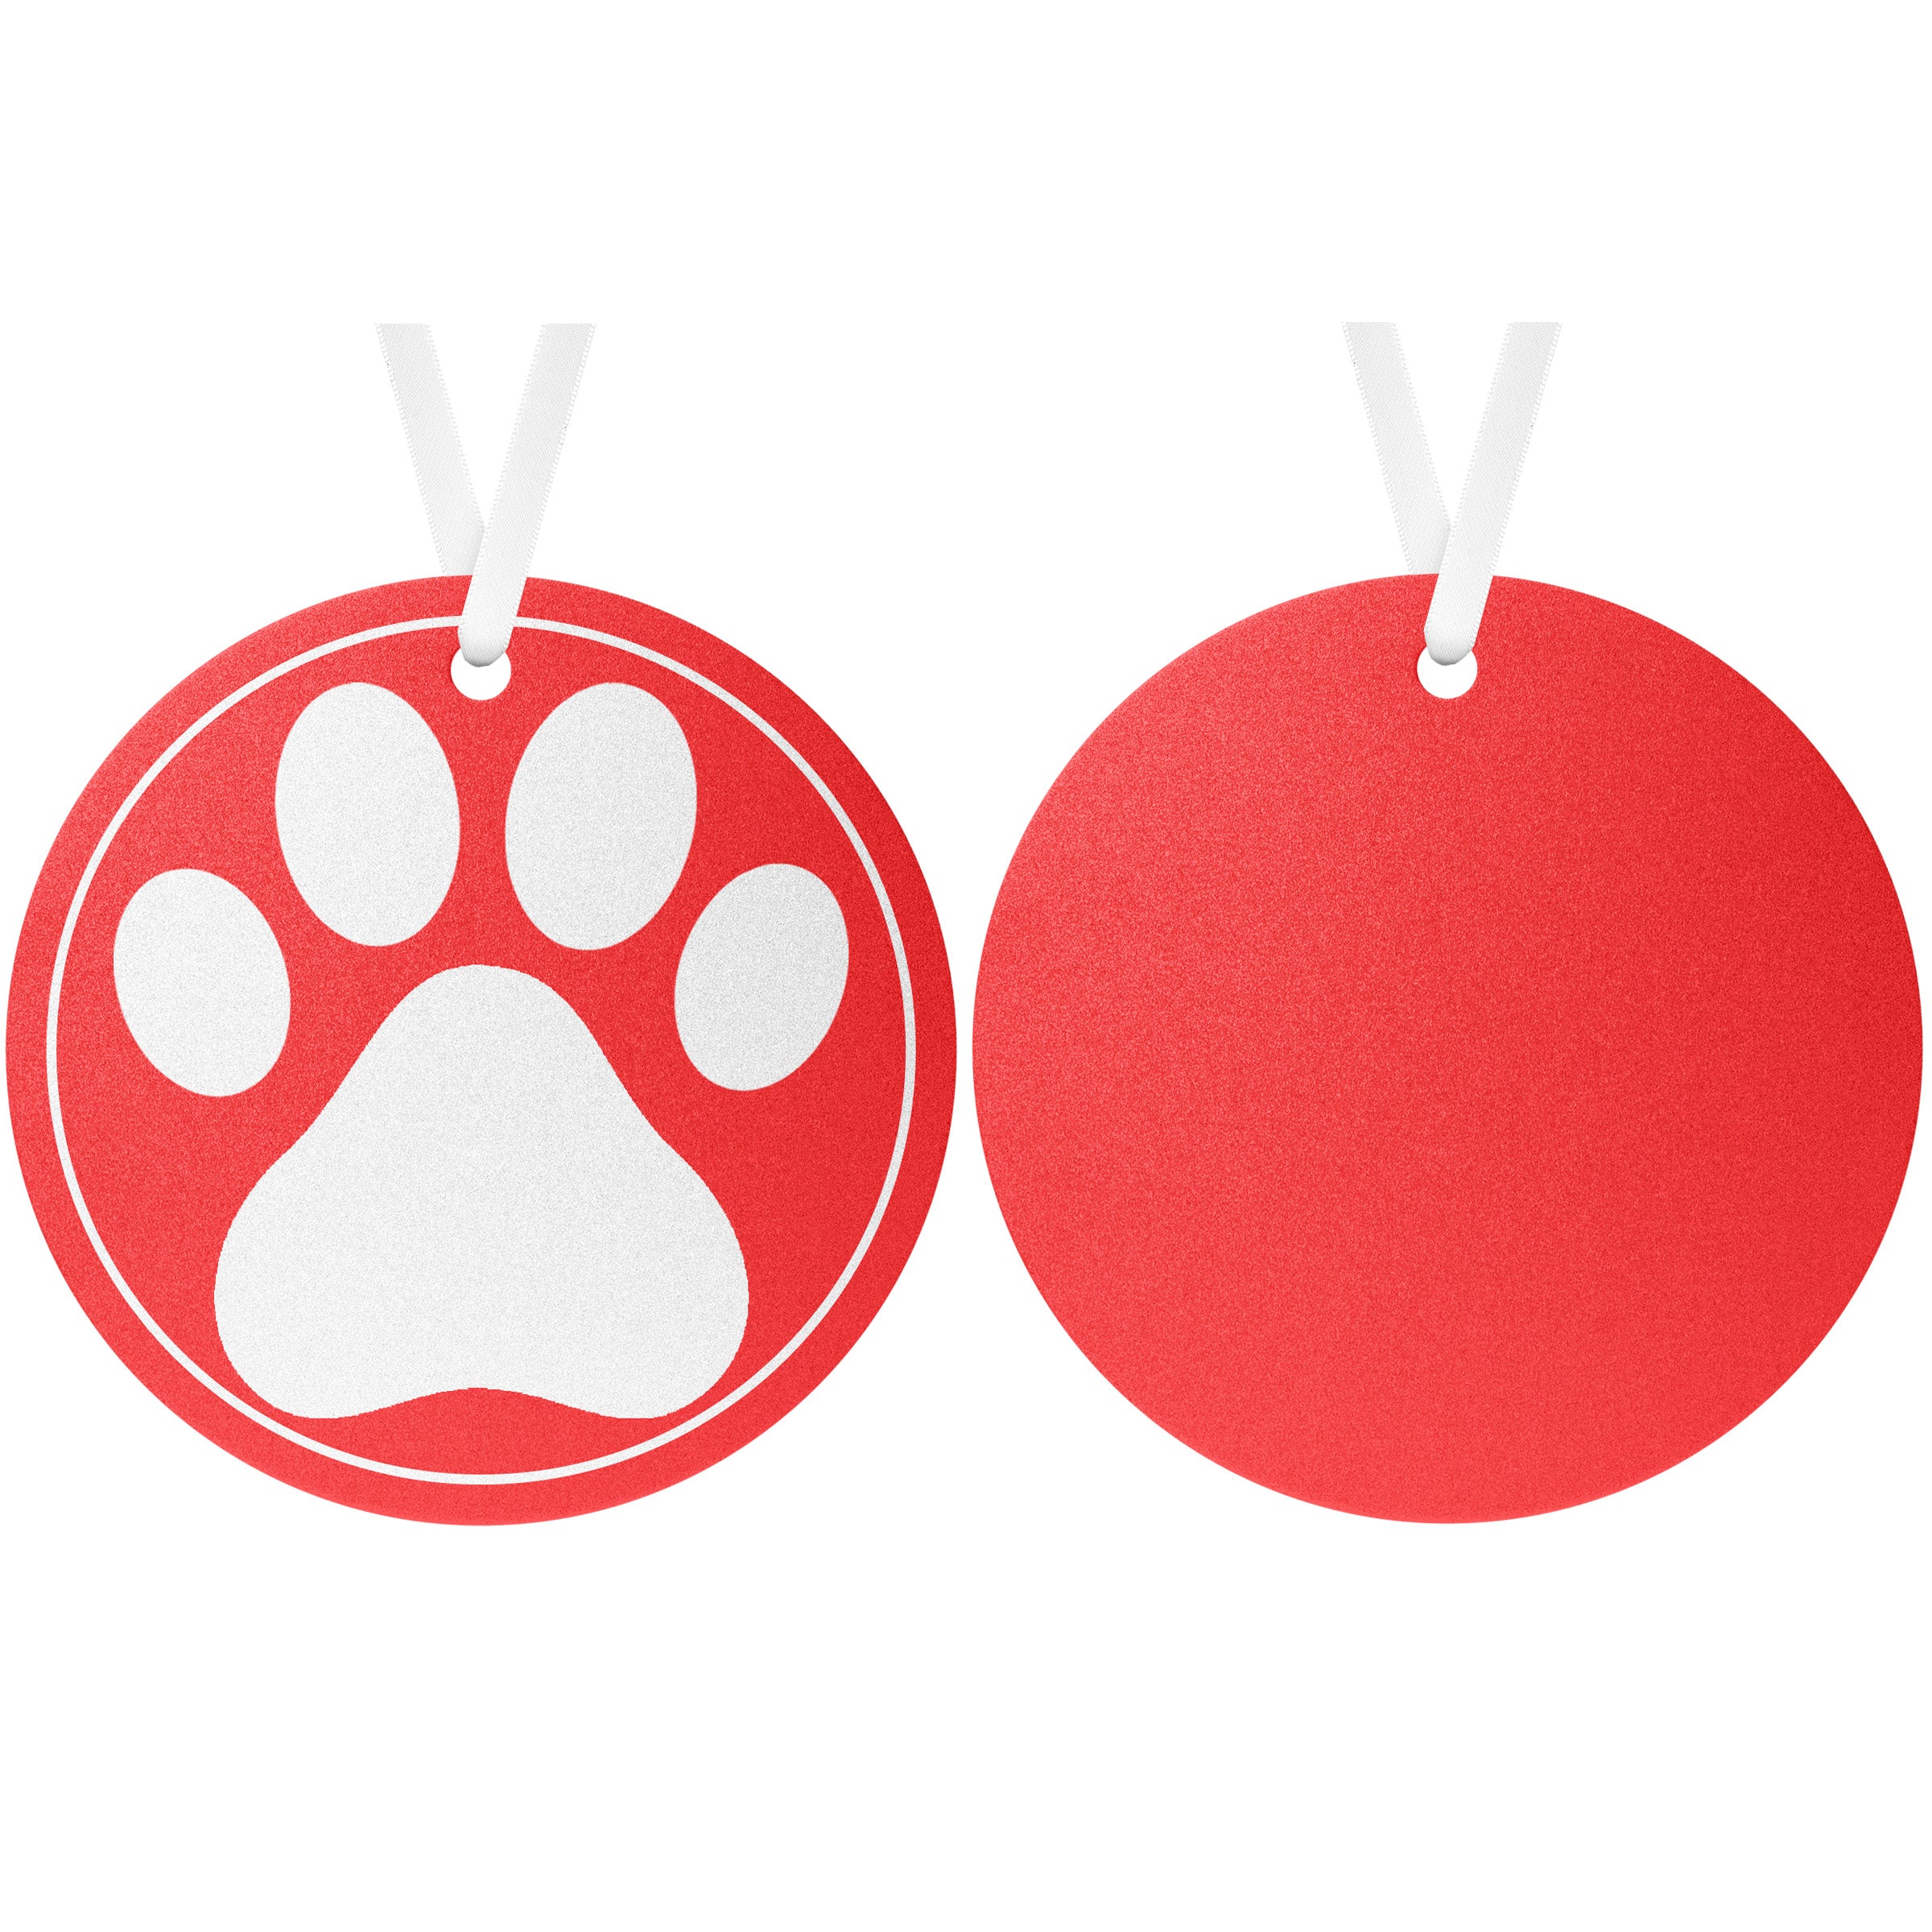 PawPrint Ornament (Red)